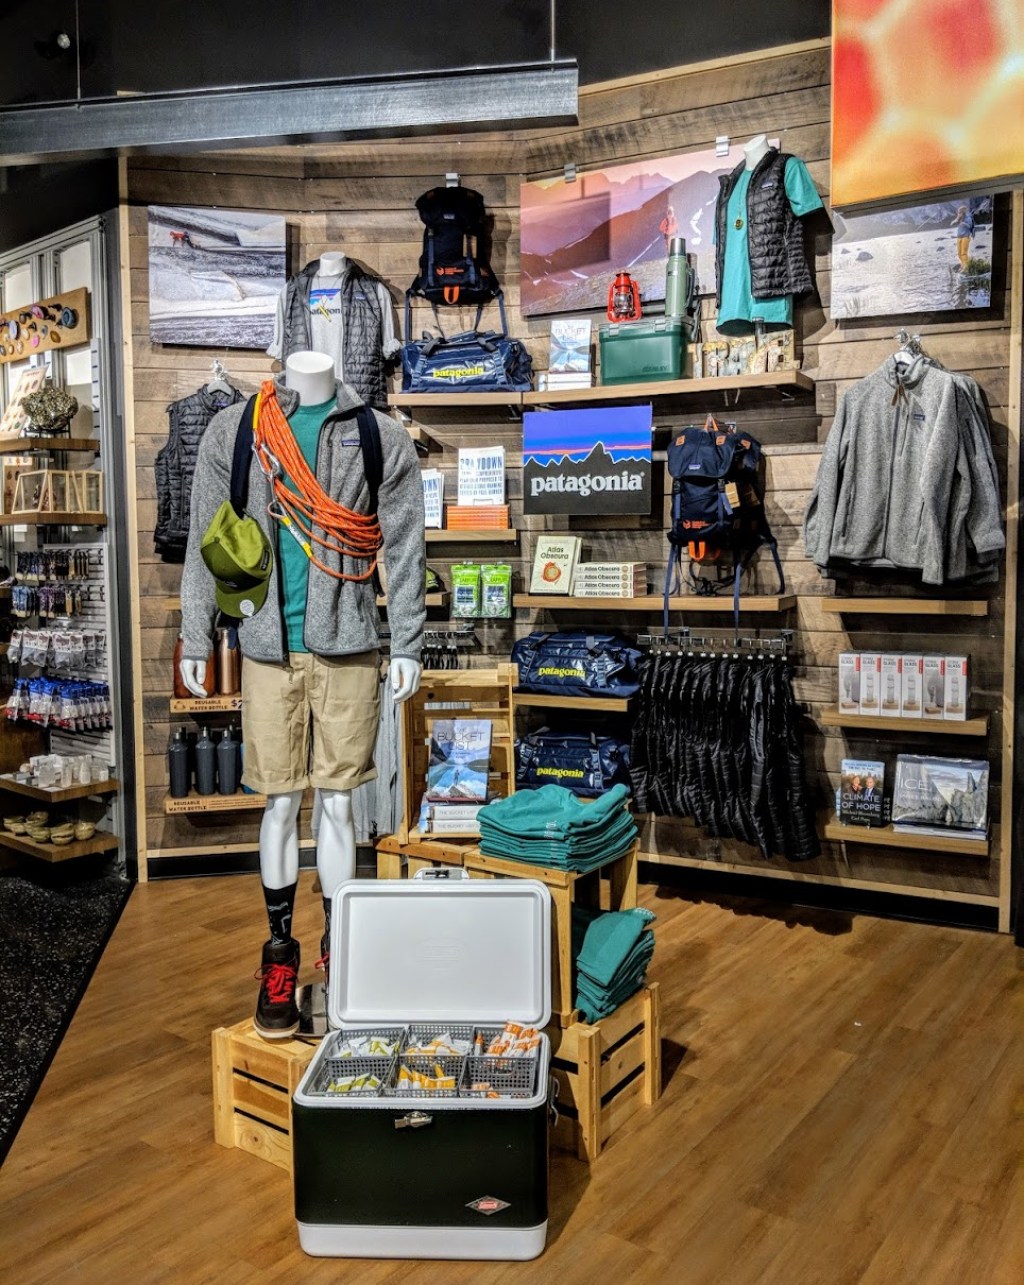 A display of Patagonia clothing and accessories in a museum gift shop